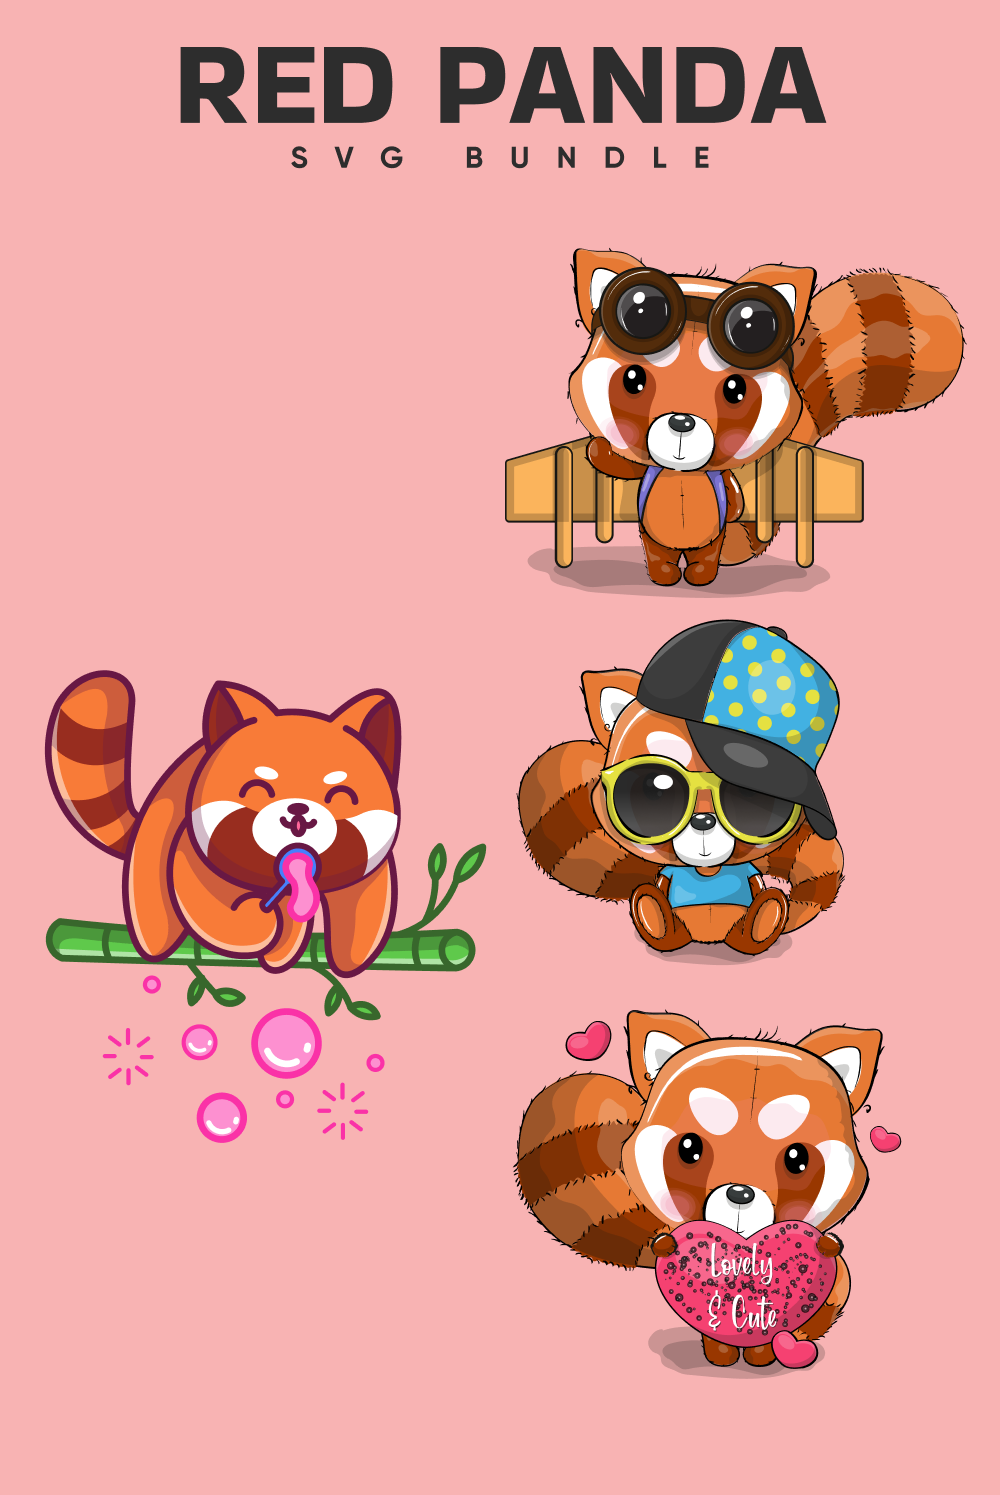 Red panda stickers on a pink background.